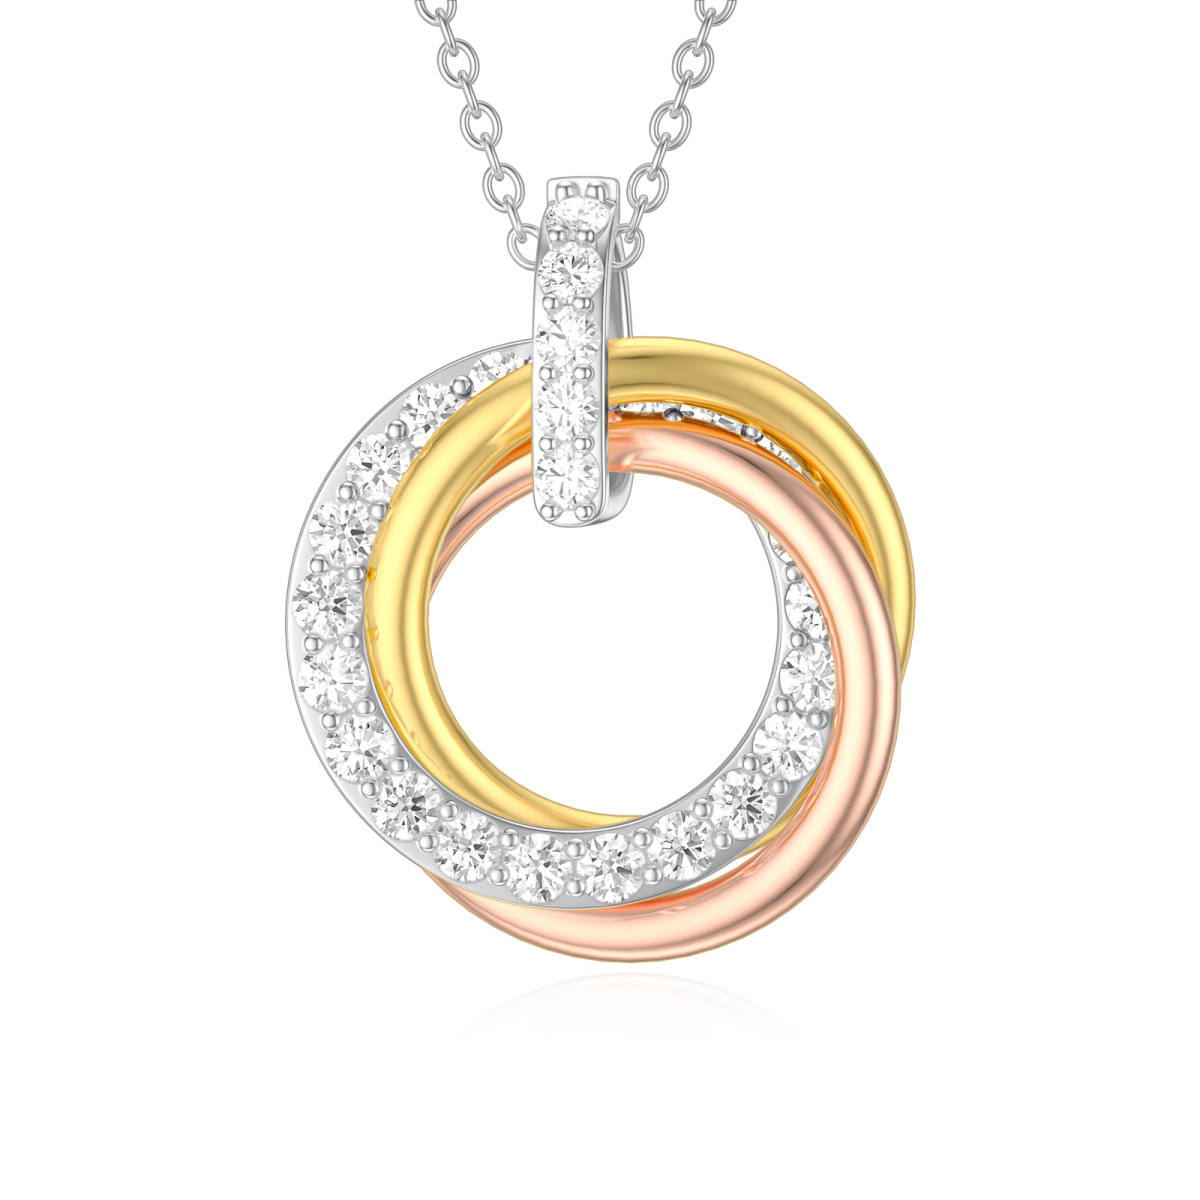 Sterling Silver Tri-tone Generation Ring Pendant Necklace-1